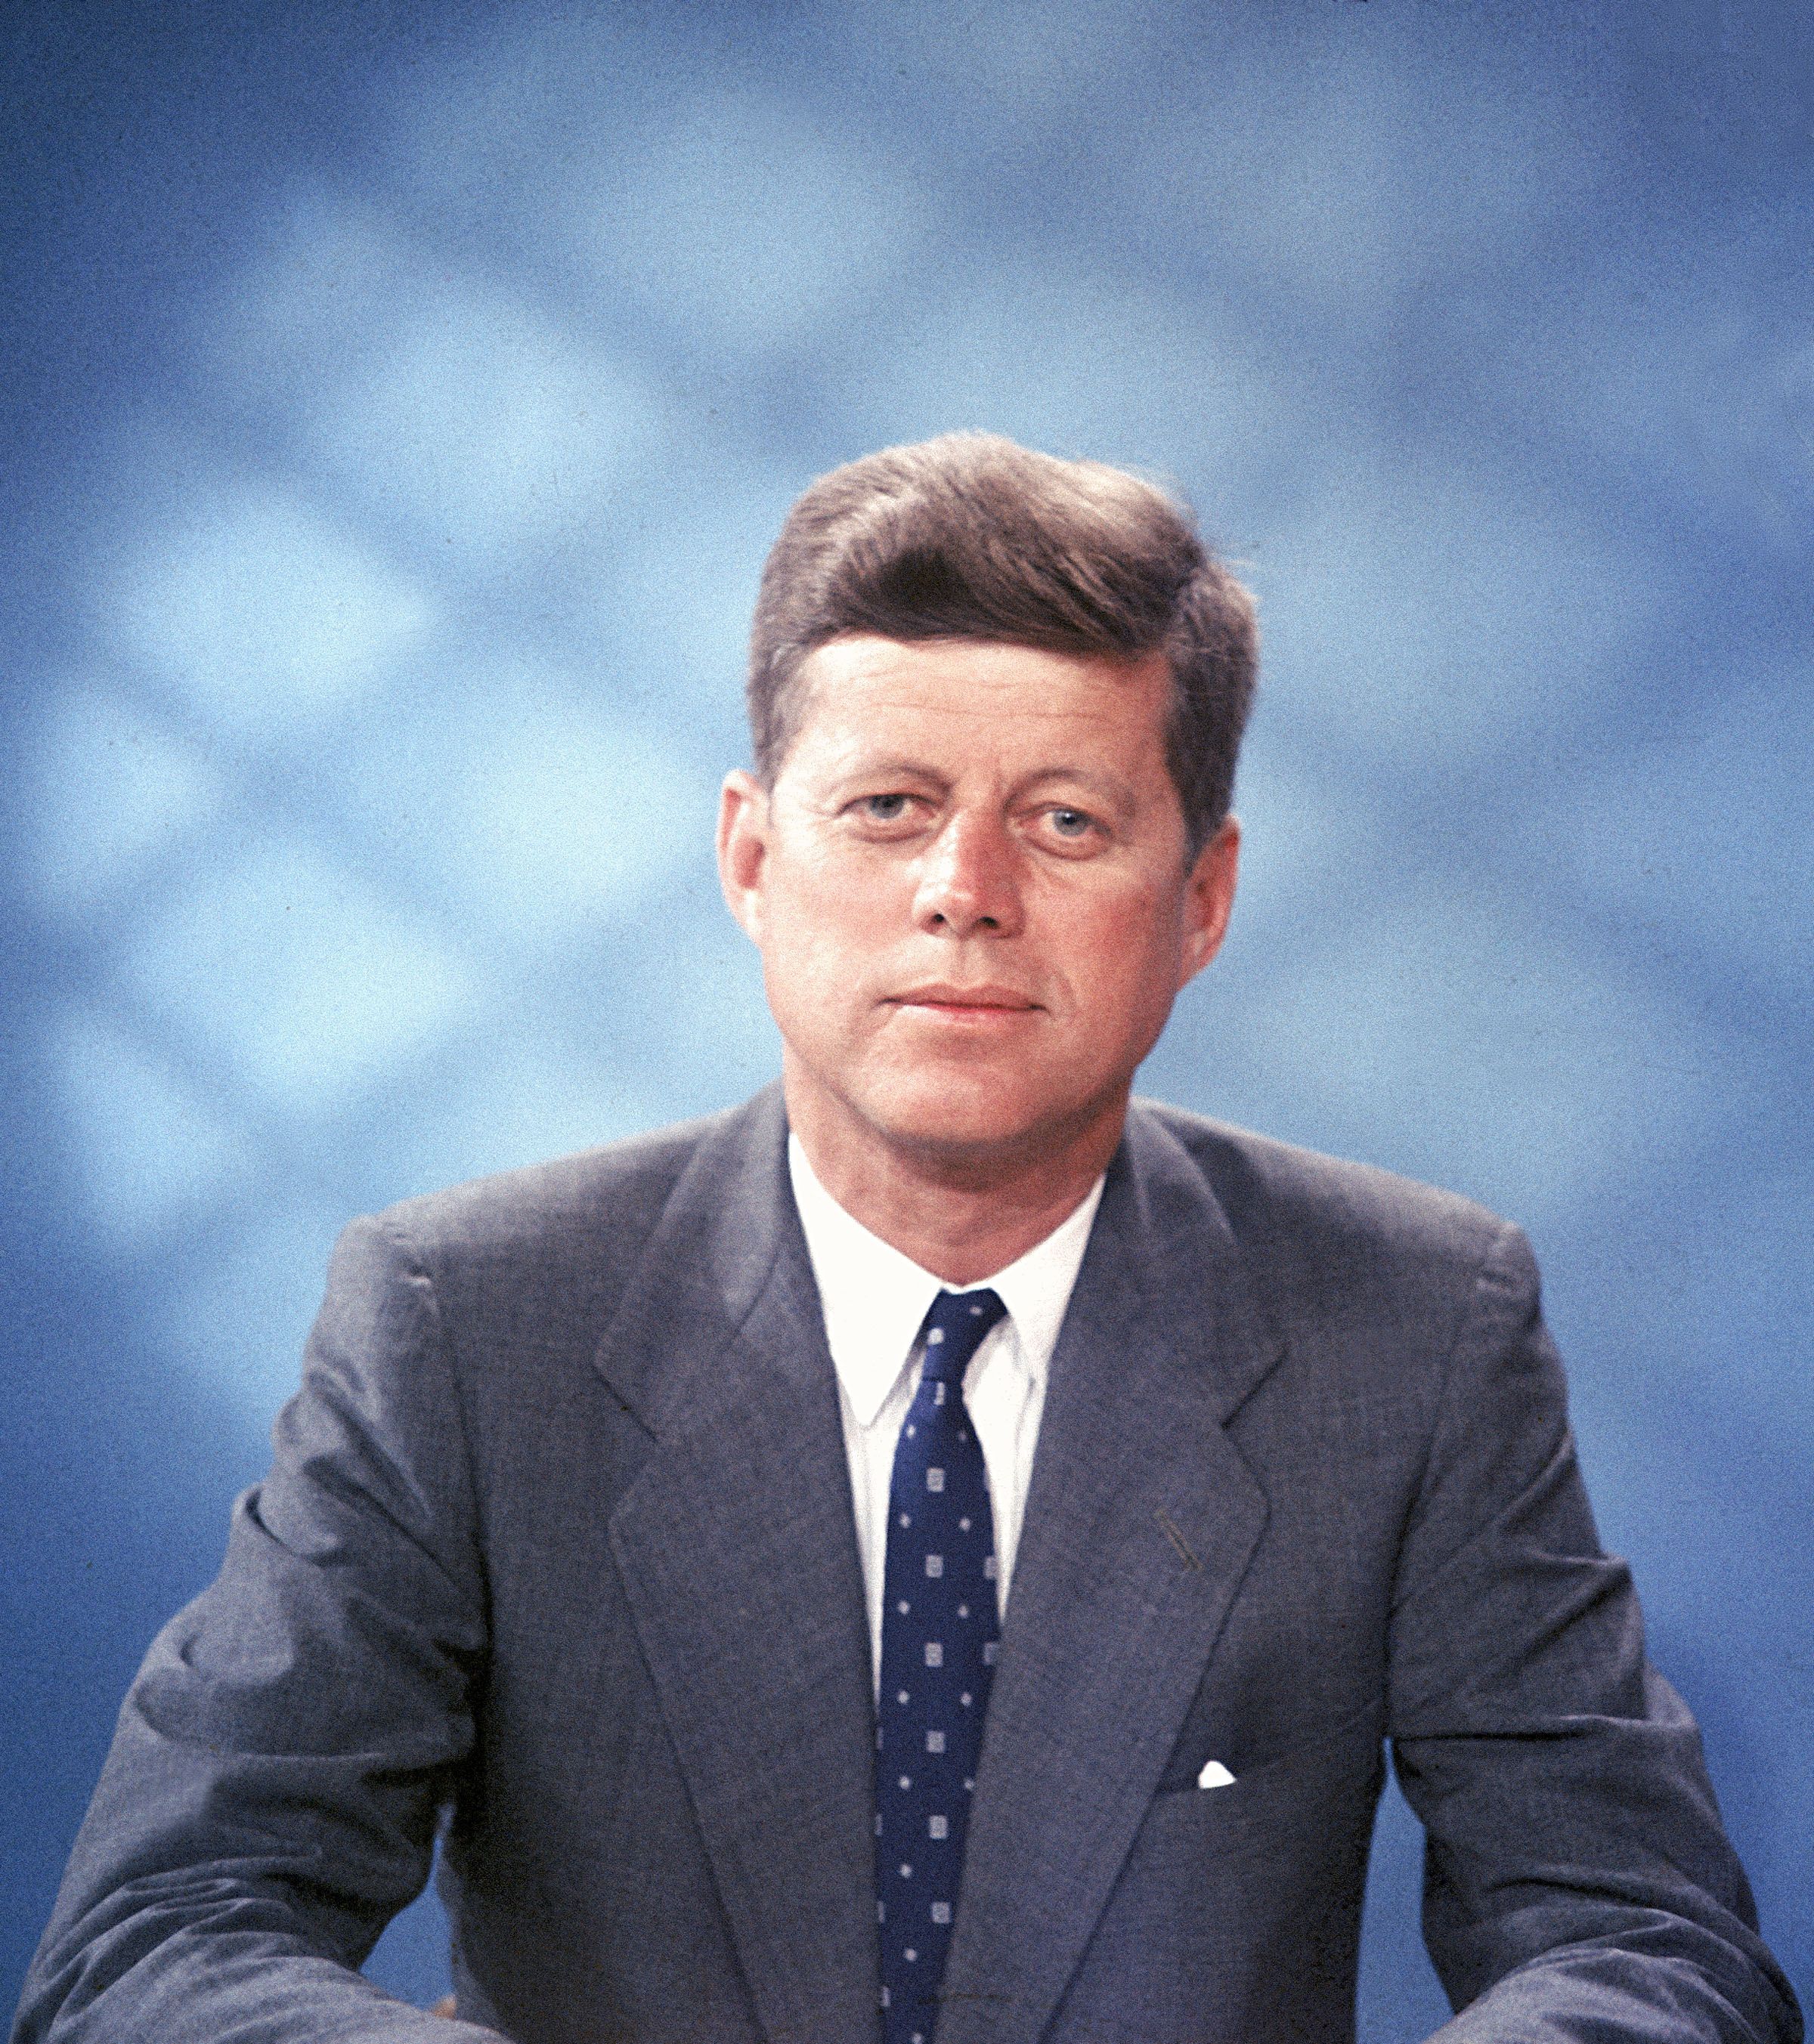 John F. Kennedy Wallpaper for PC. Full HD Picture